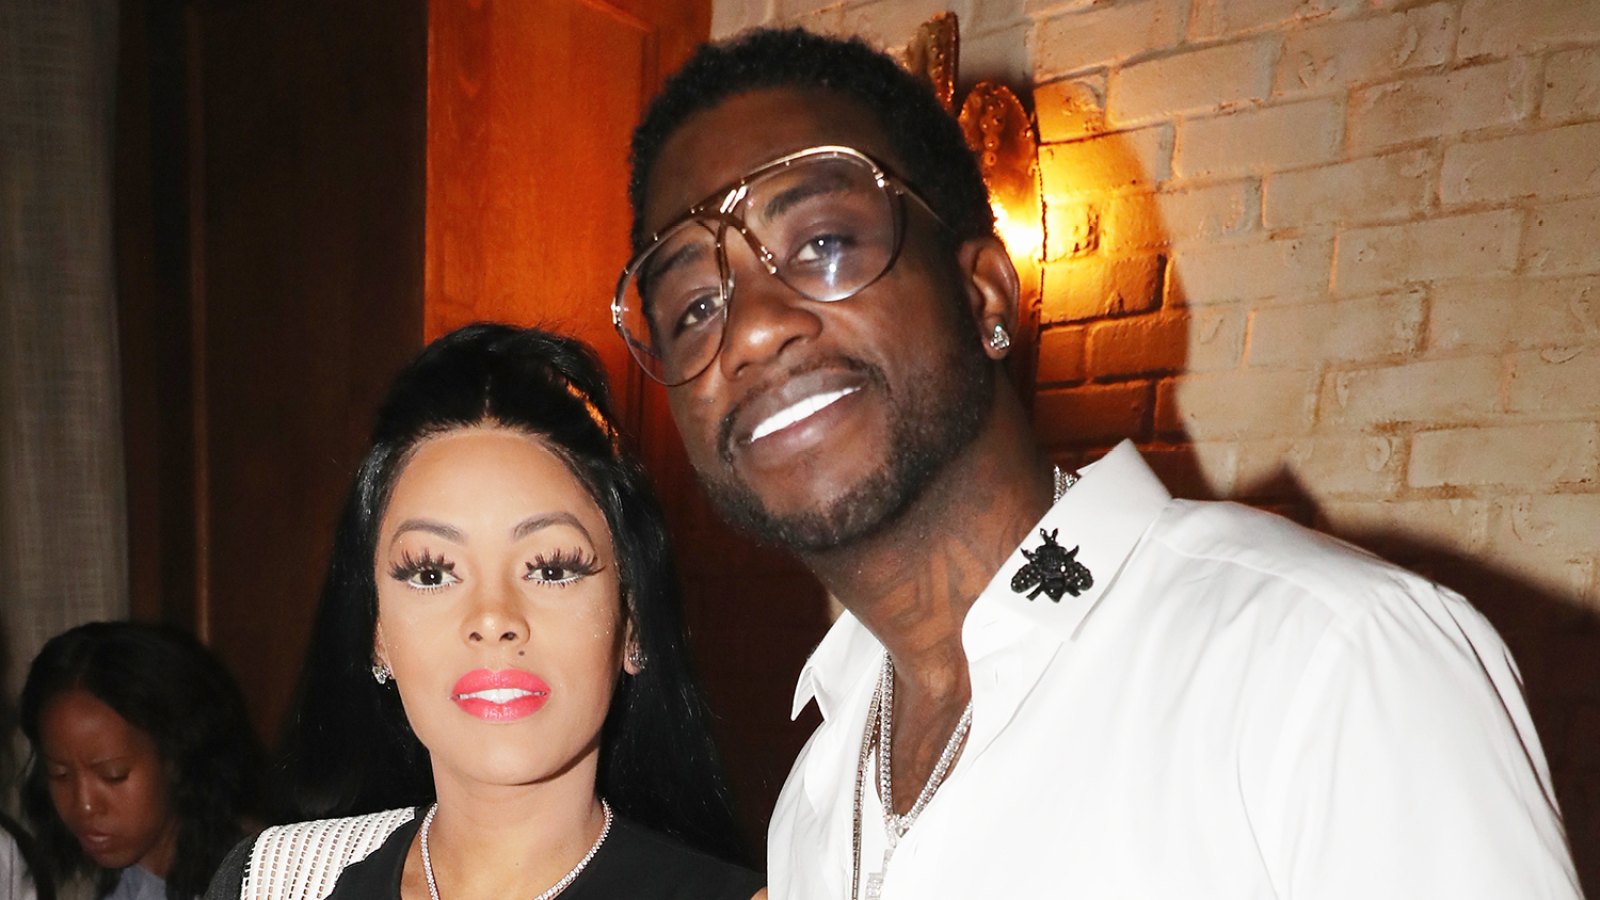 Gucci Mane Proposes to Girlfriend on the Kiss Cam